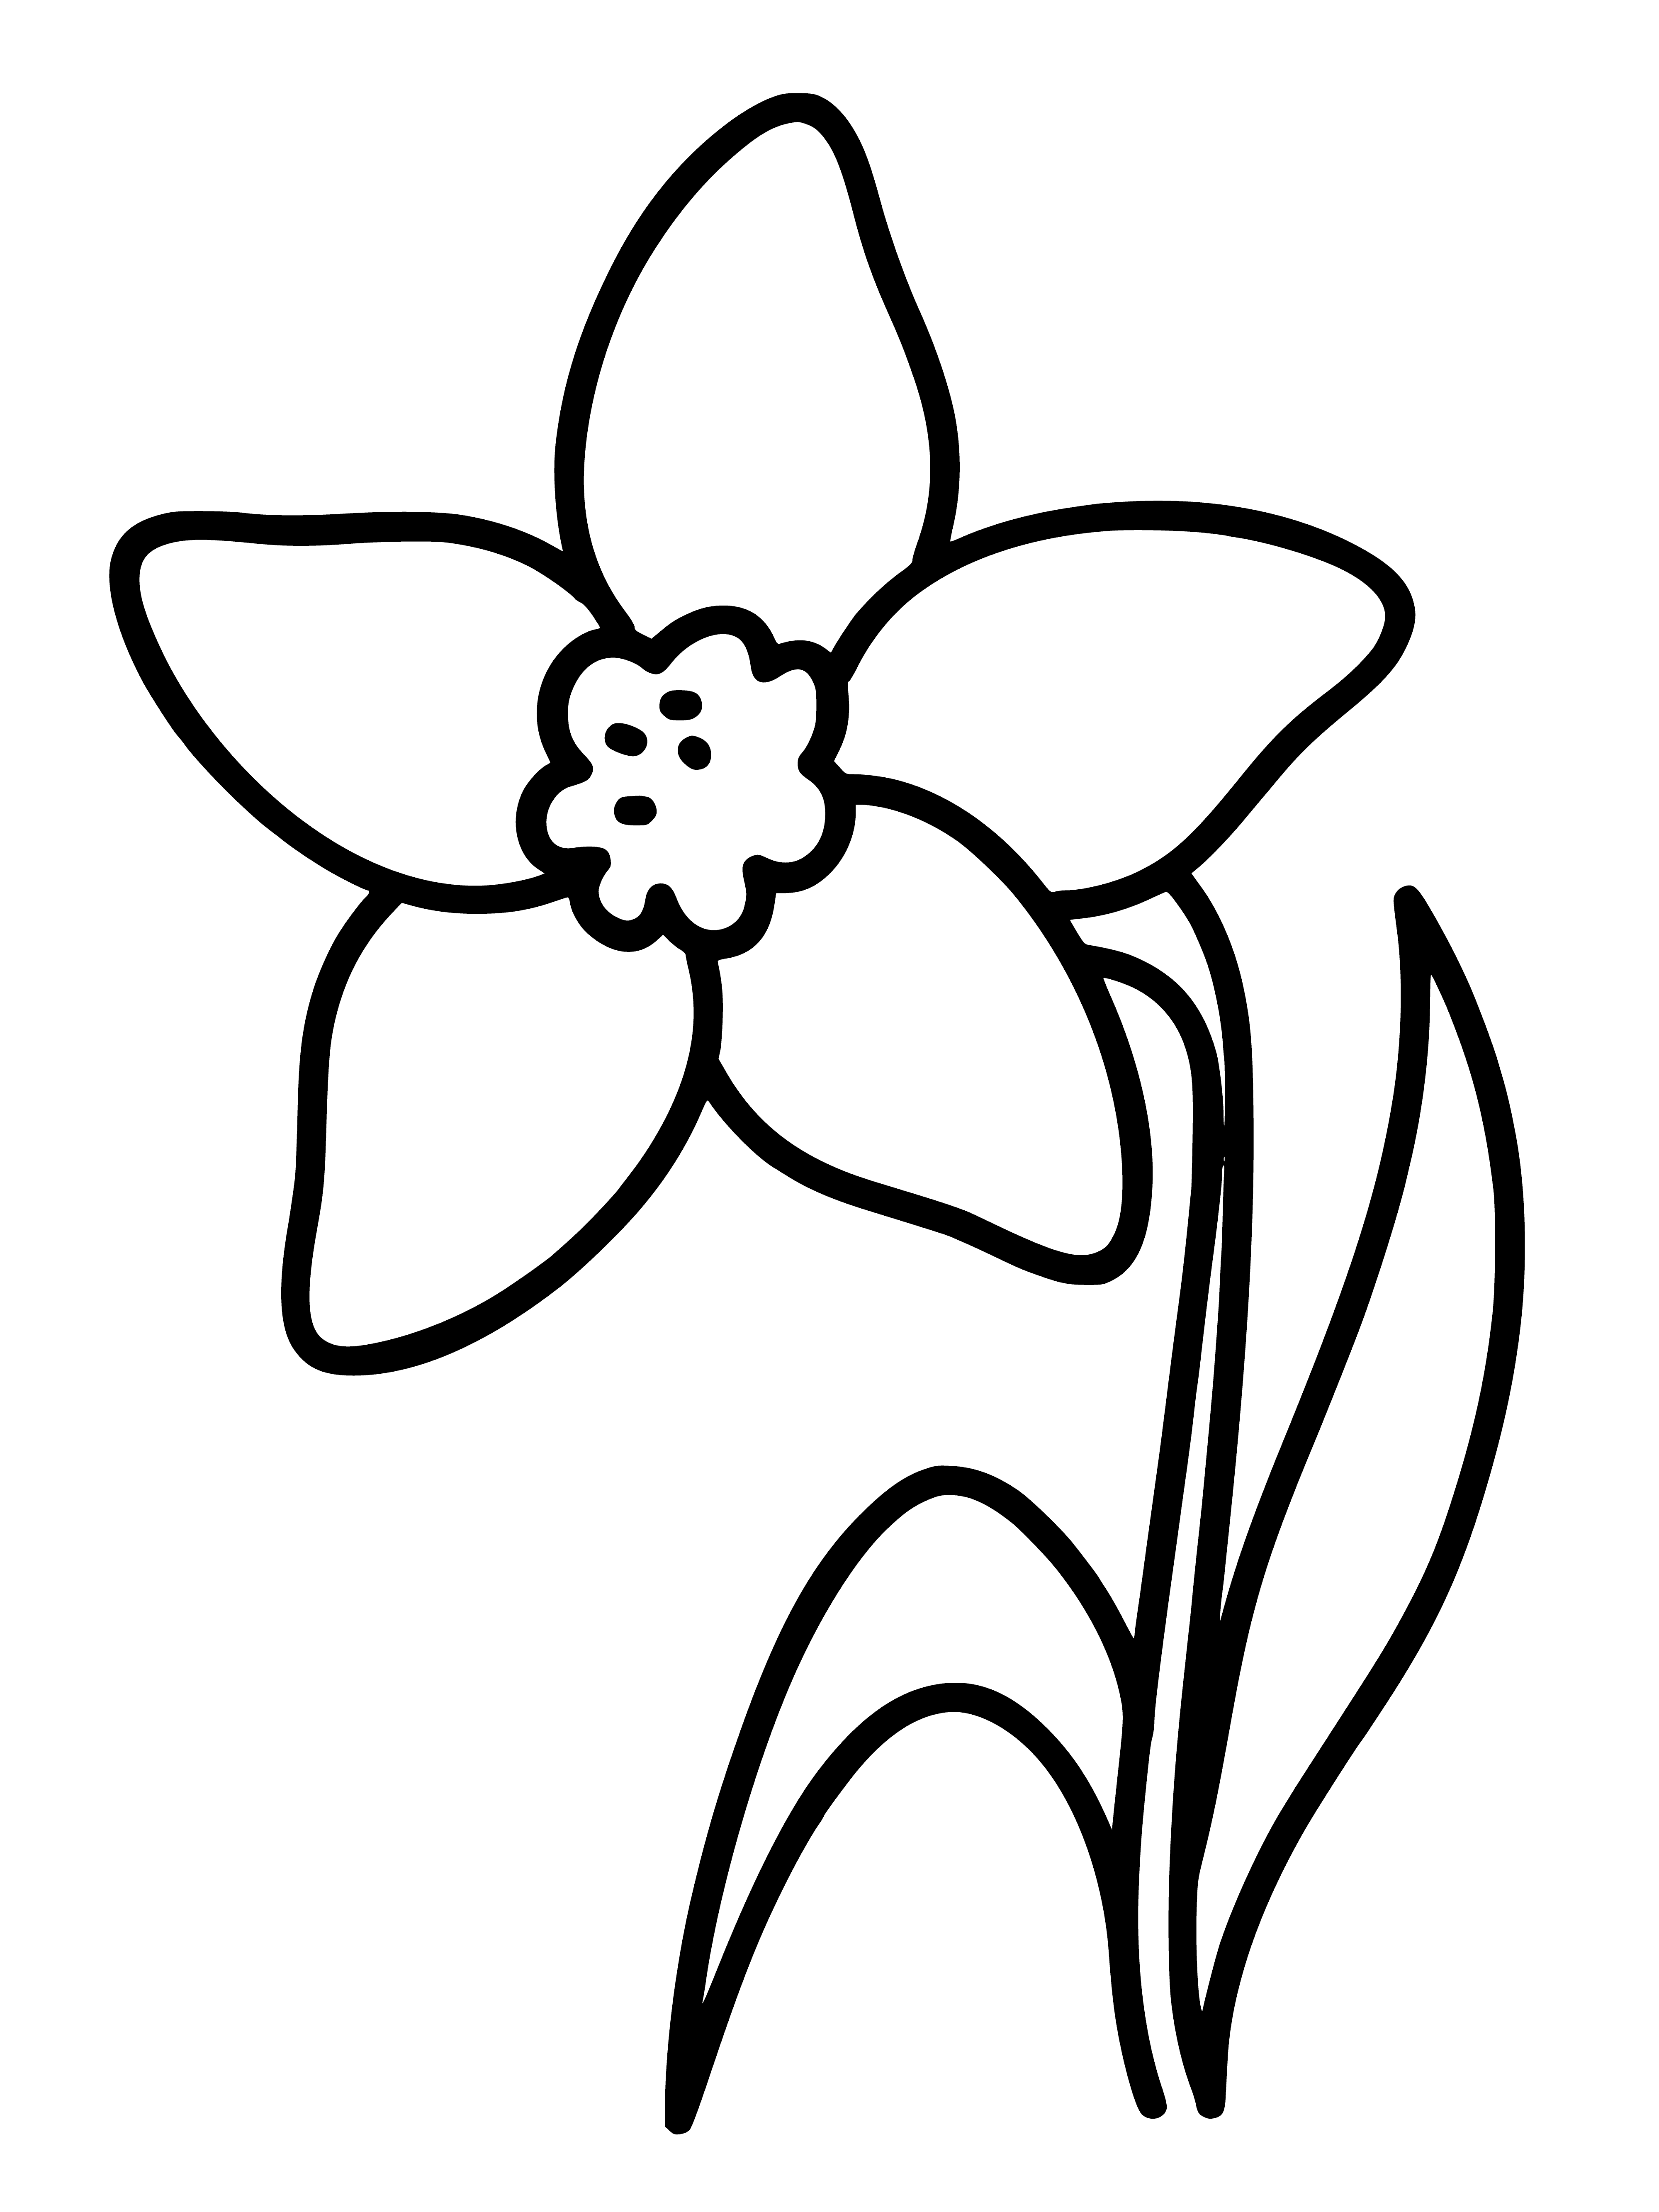 coloring page: A narcissus flower with yellow stem, white petals and yellow center, surrounded by smaller petals, adorns a coloring page.